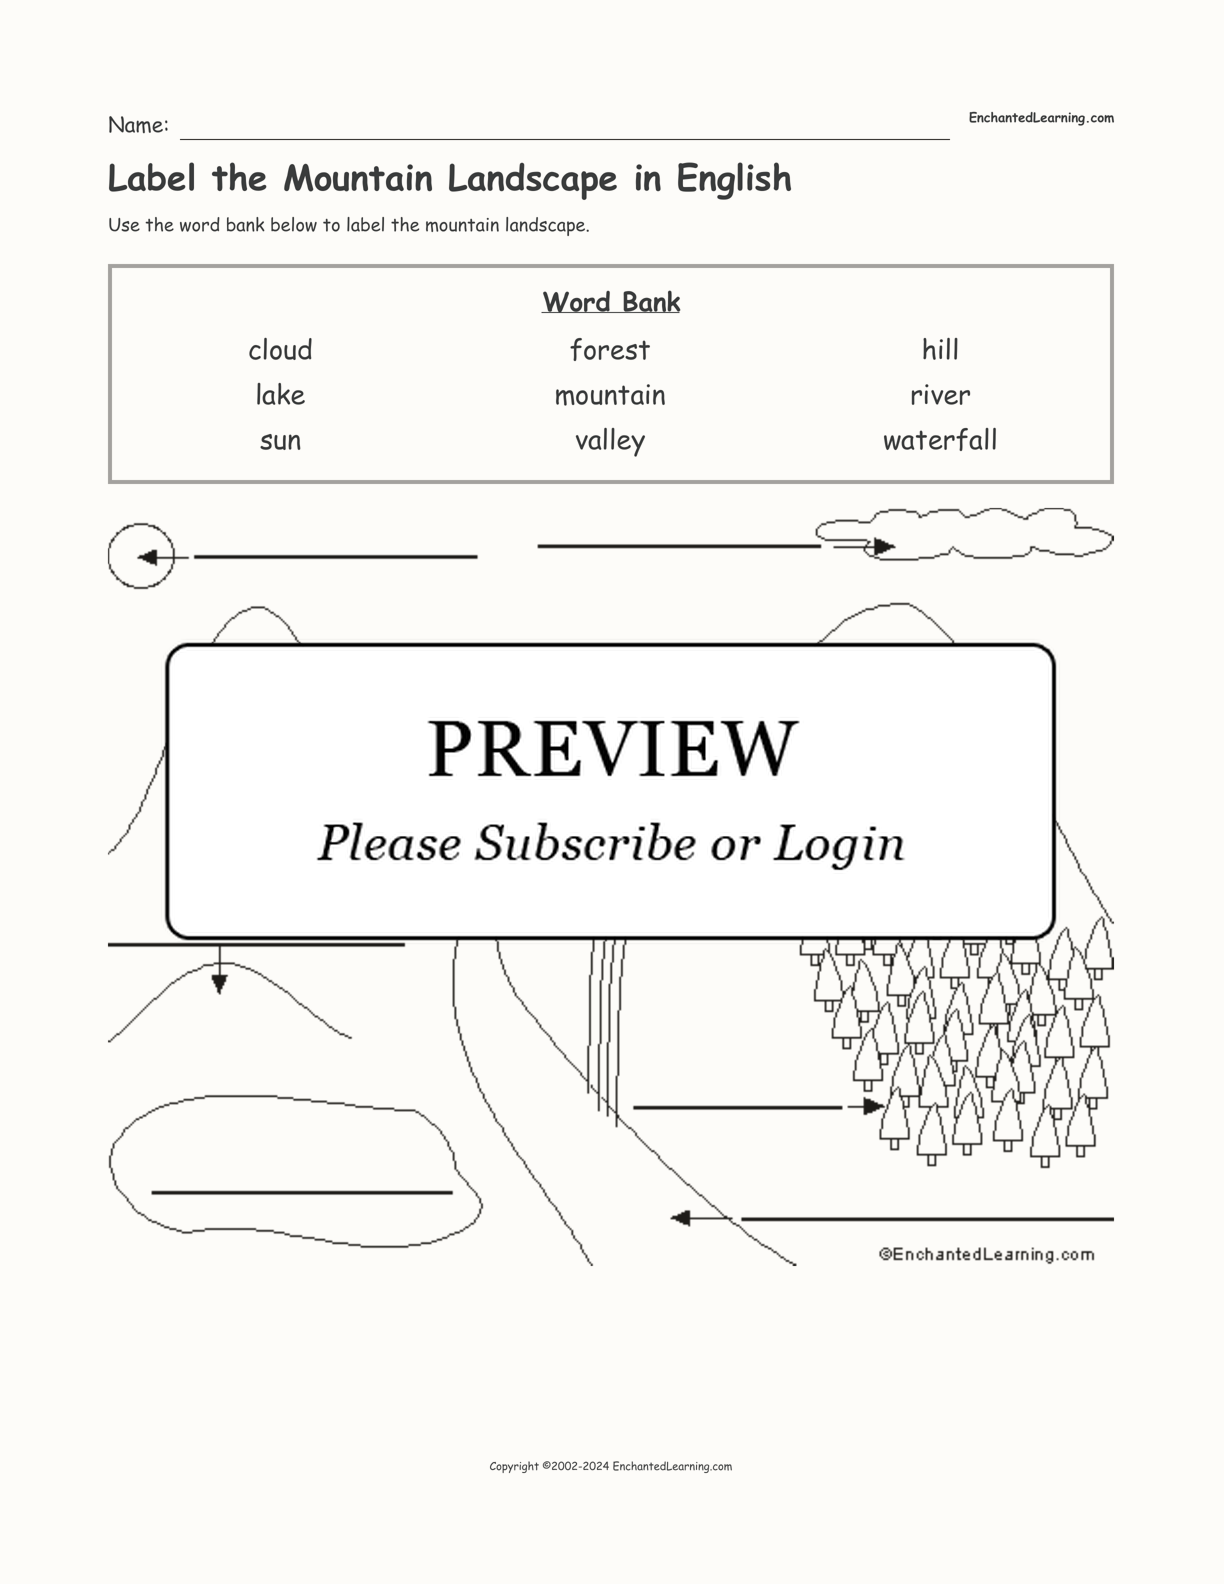 Label the Mountain Landscape in English interactive worksheet page 1